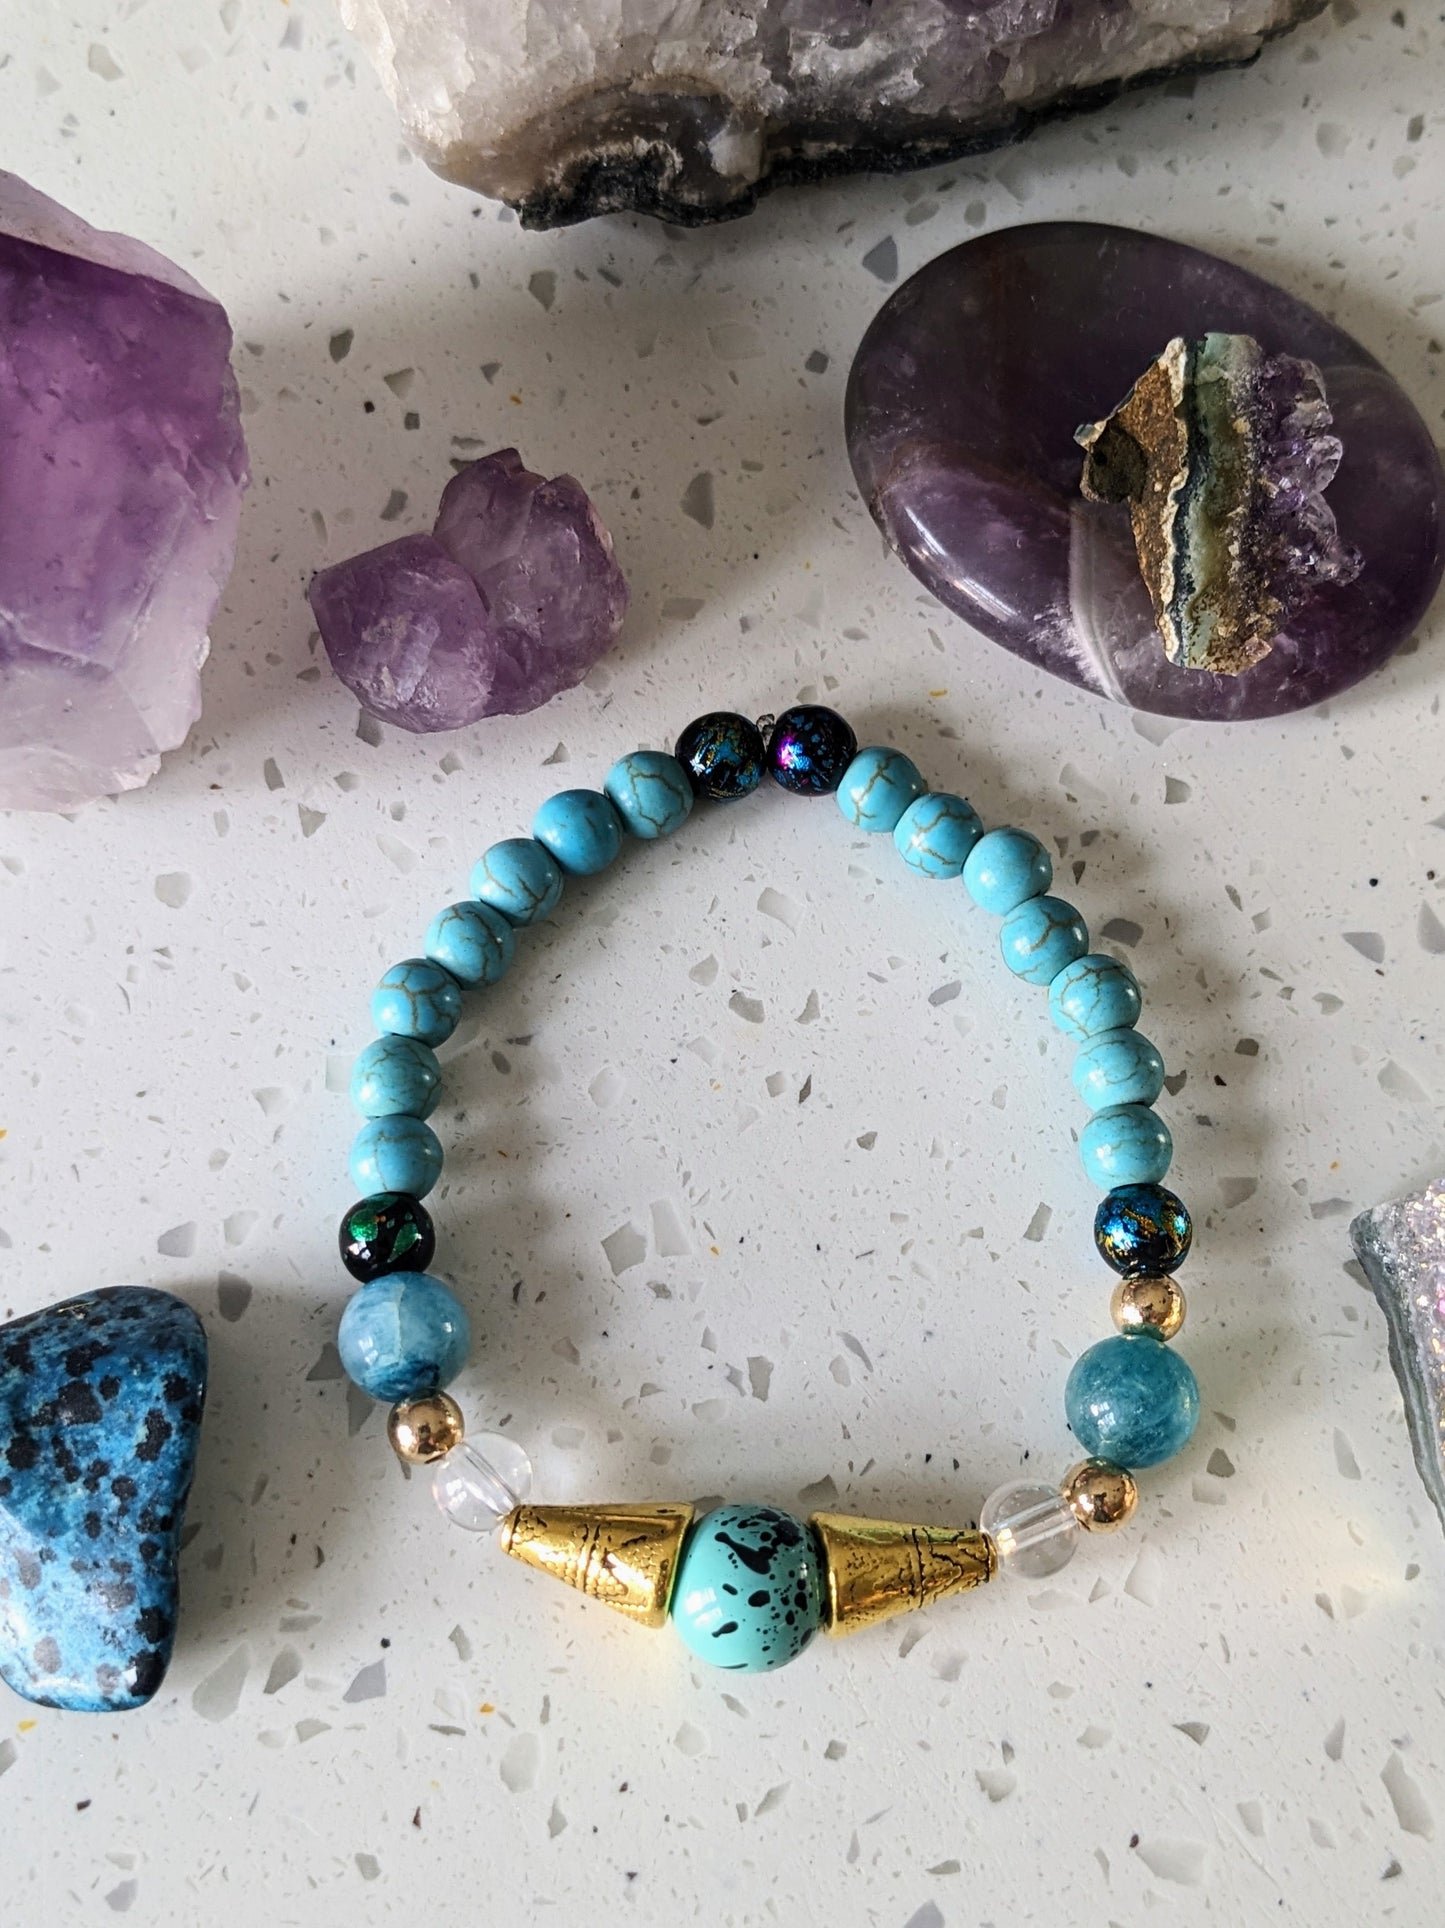 A little Touch of Apatite